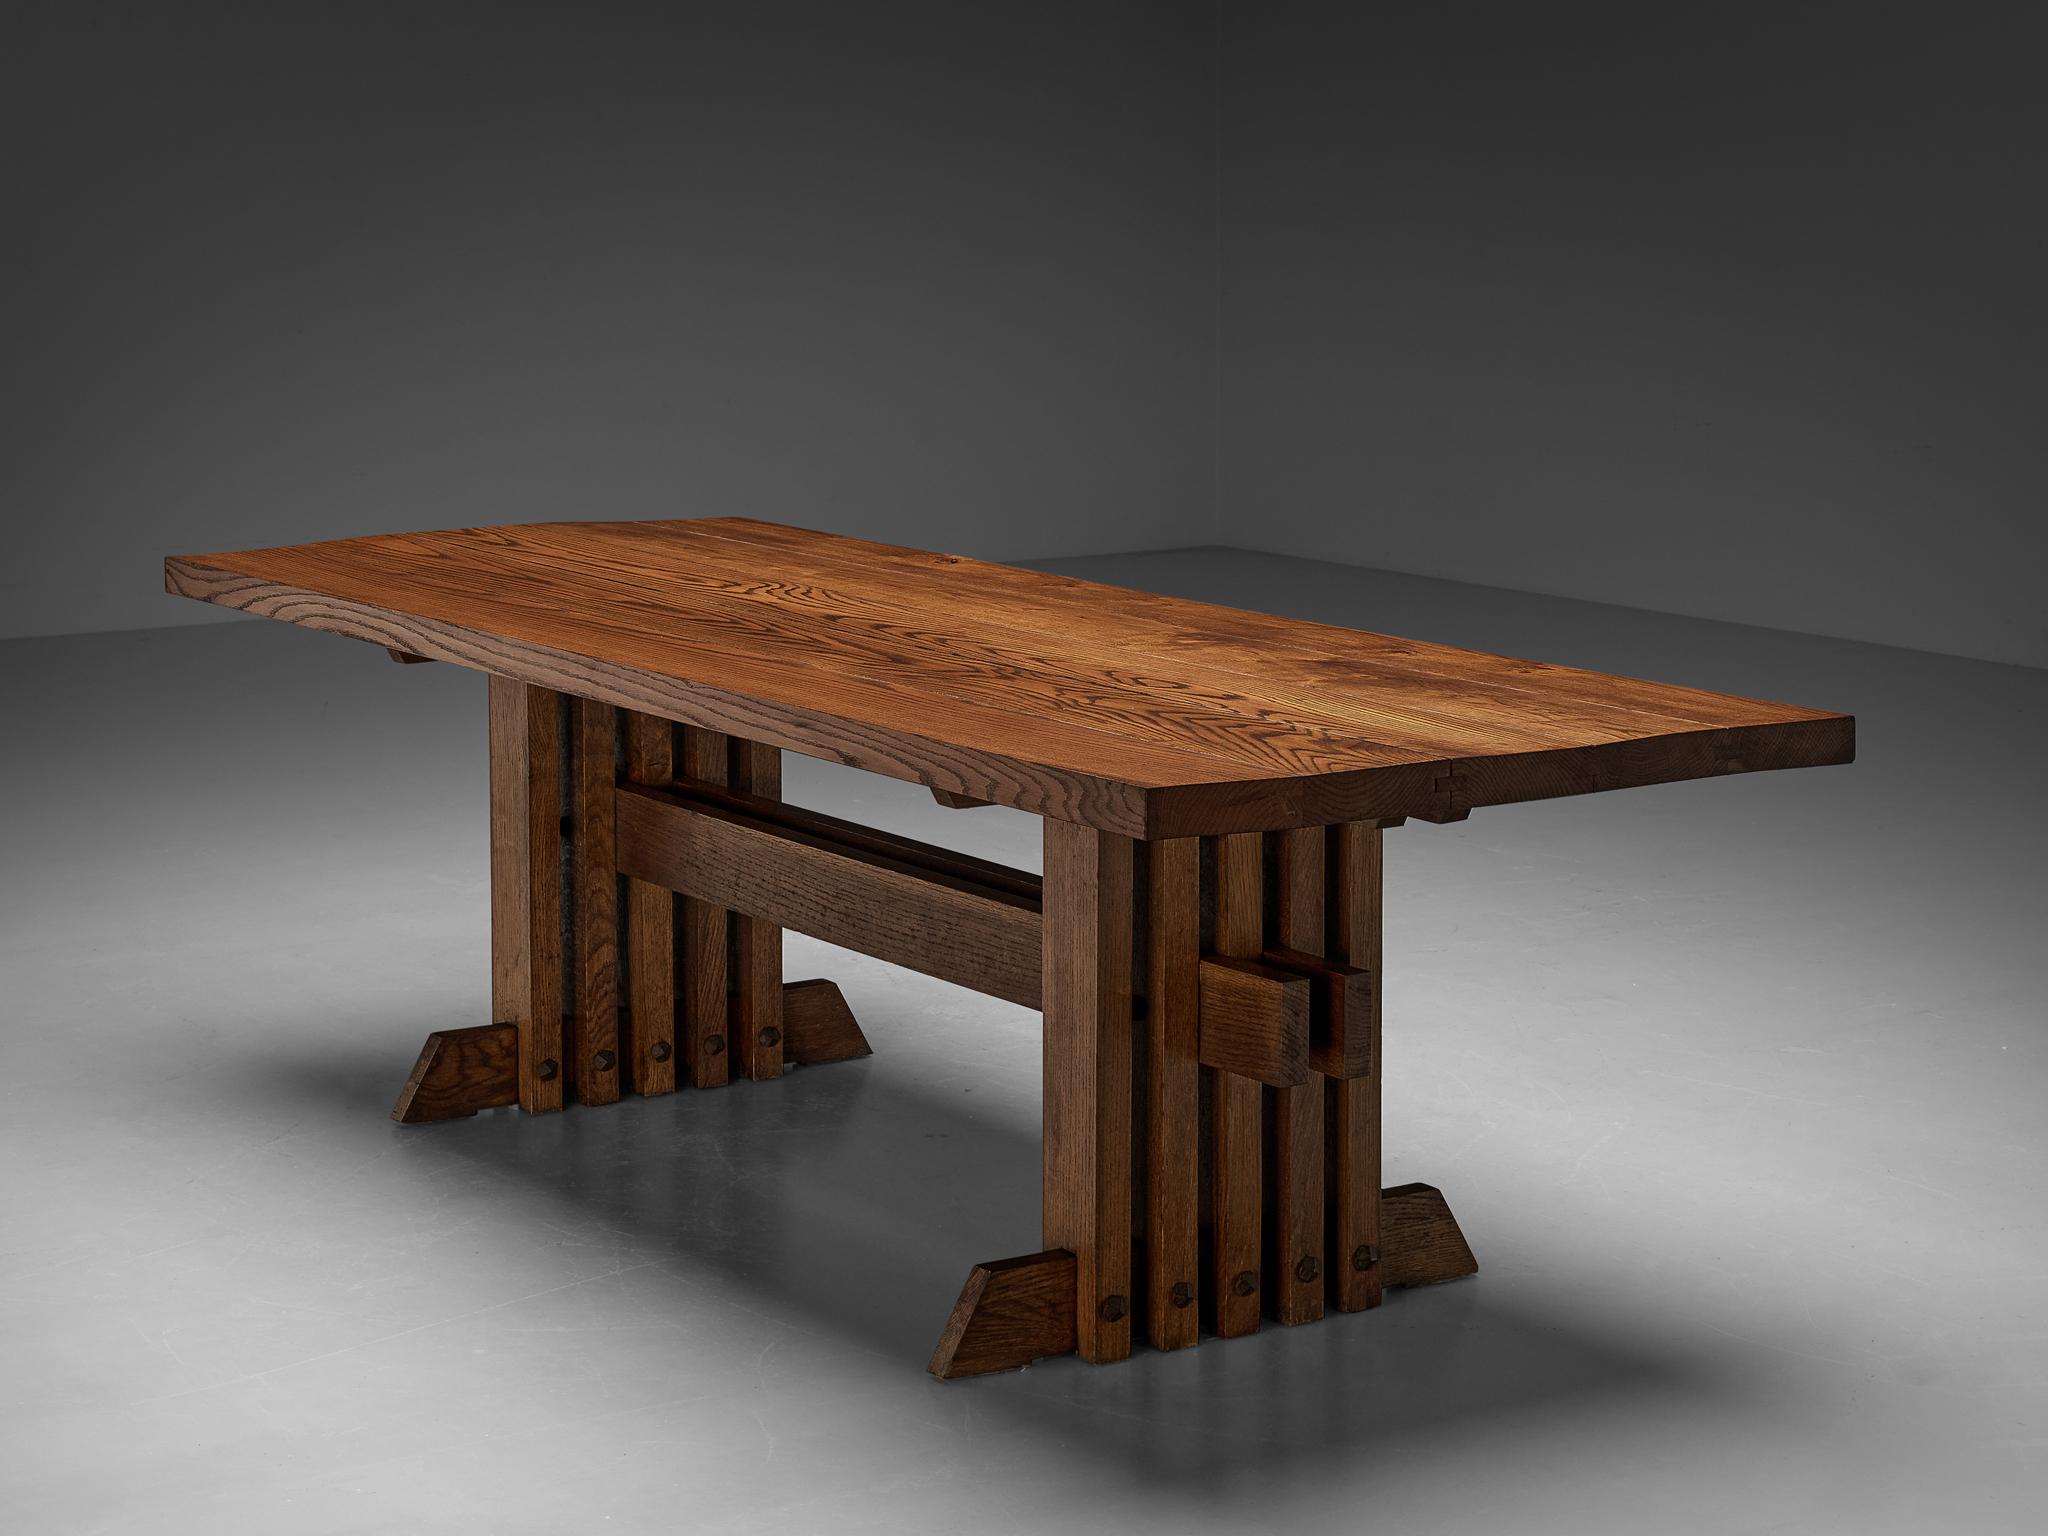 Jordi Vilanova I Bosch, dining table, oak, iron, Spain, 1960s.

This table is solid, architectural and robust. Design qualities that are both typical for Spanish midcentury design and especially for the works of Jordi Vilanovo. Although his work is